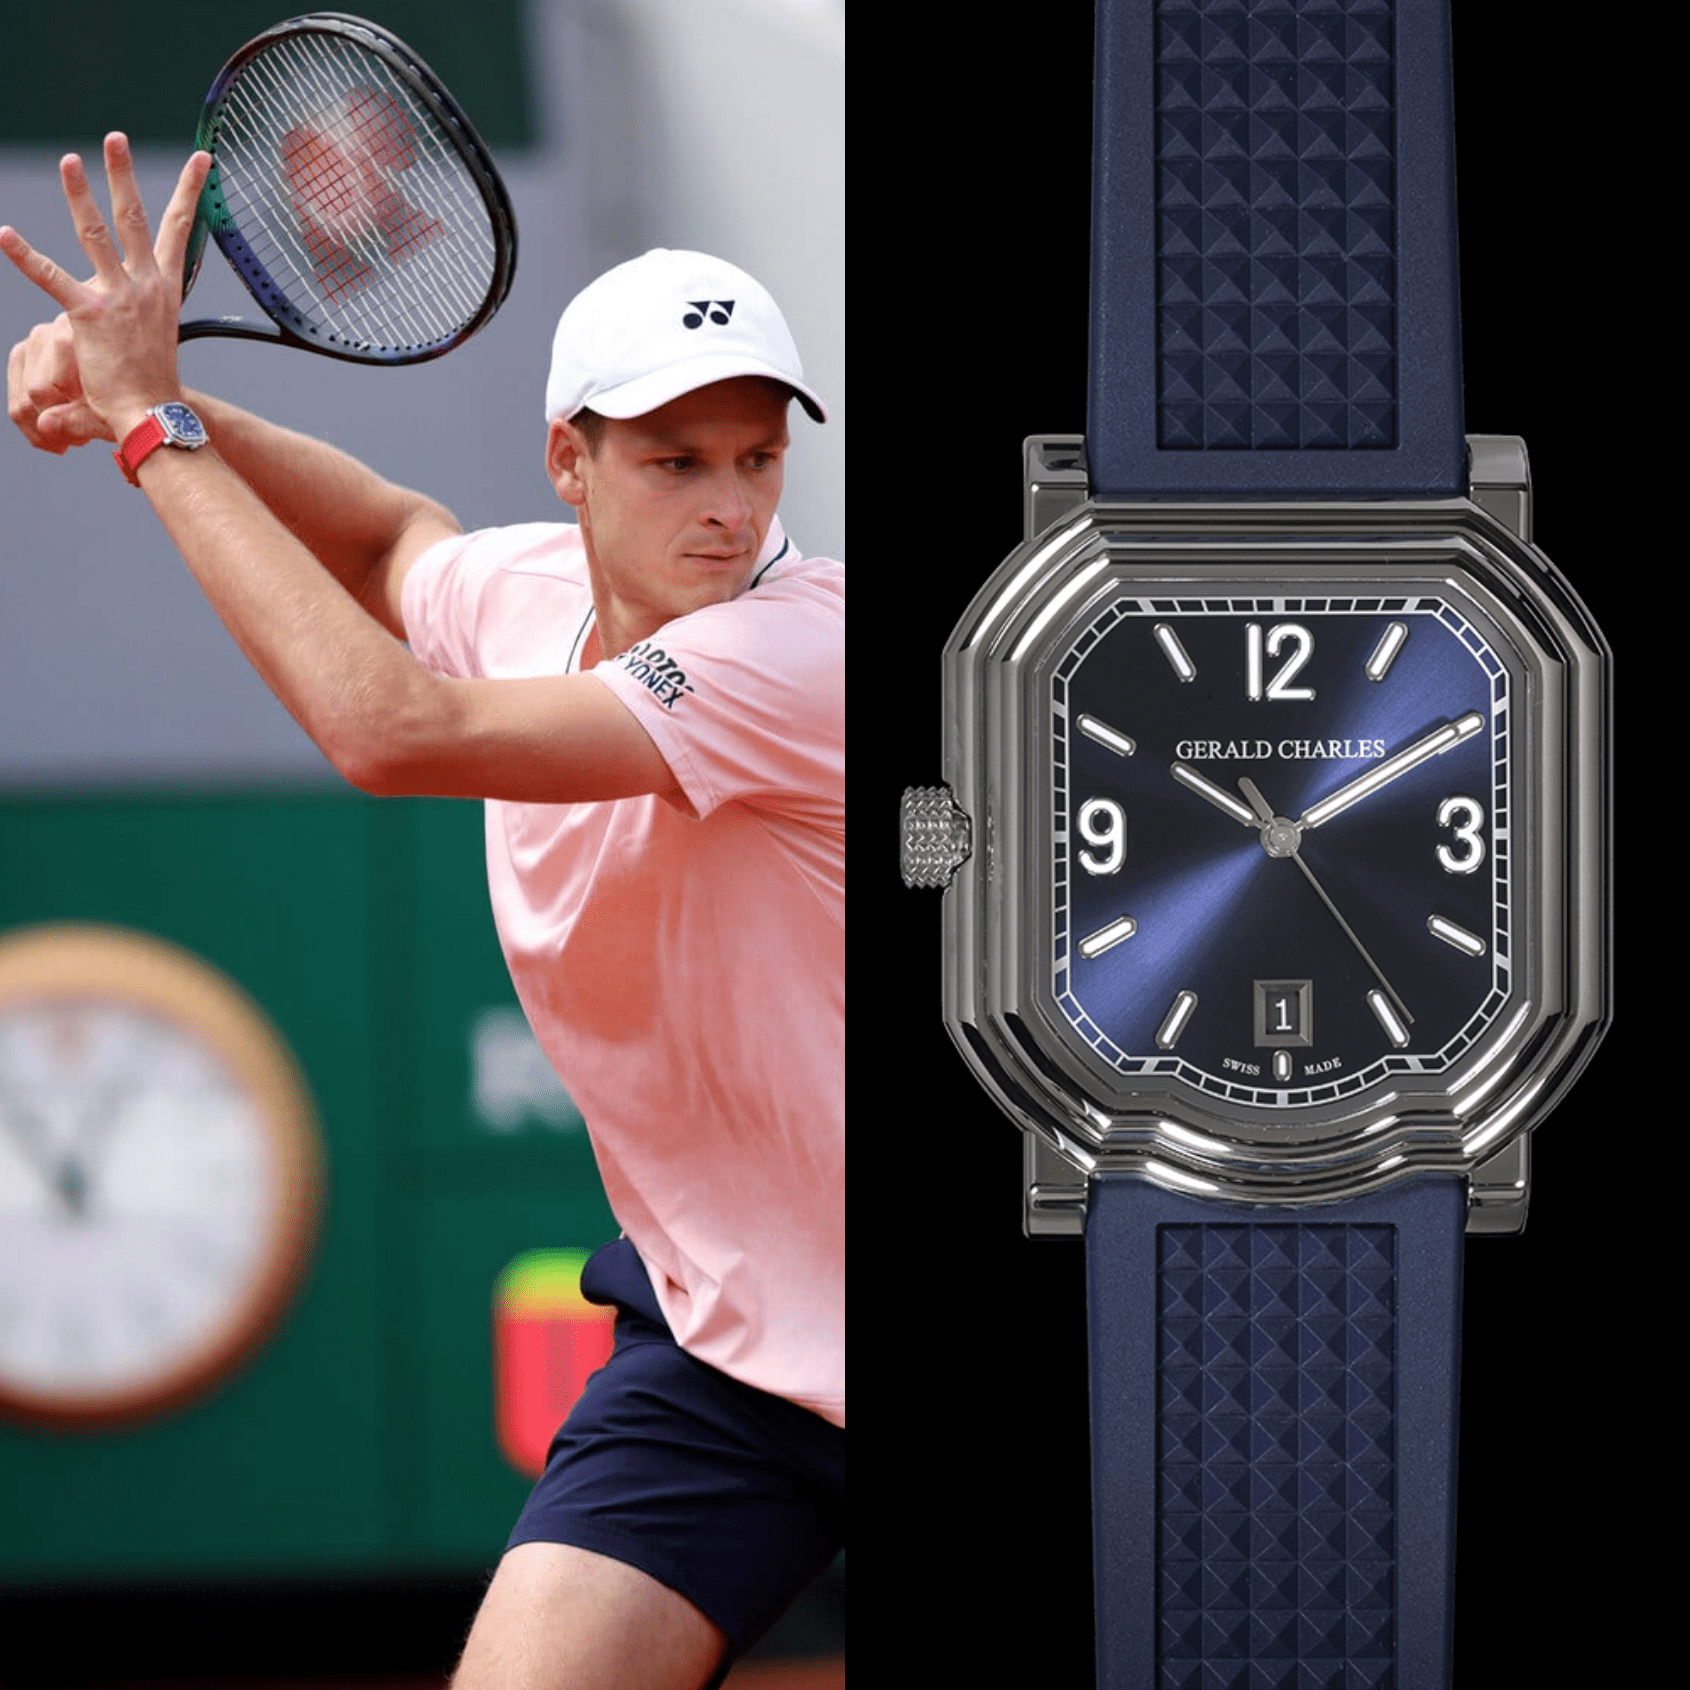 Hubi Hurkacz may have just lost at the French Open, but he won in wrist-wear…